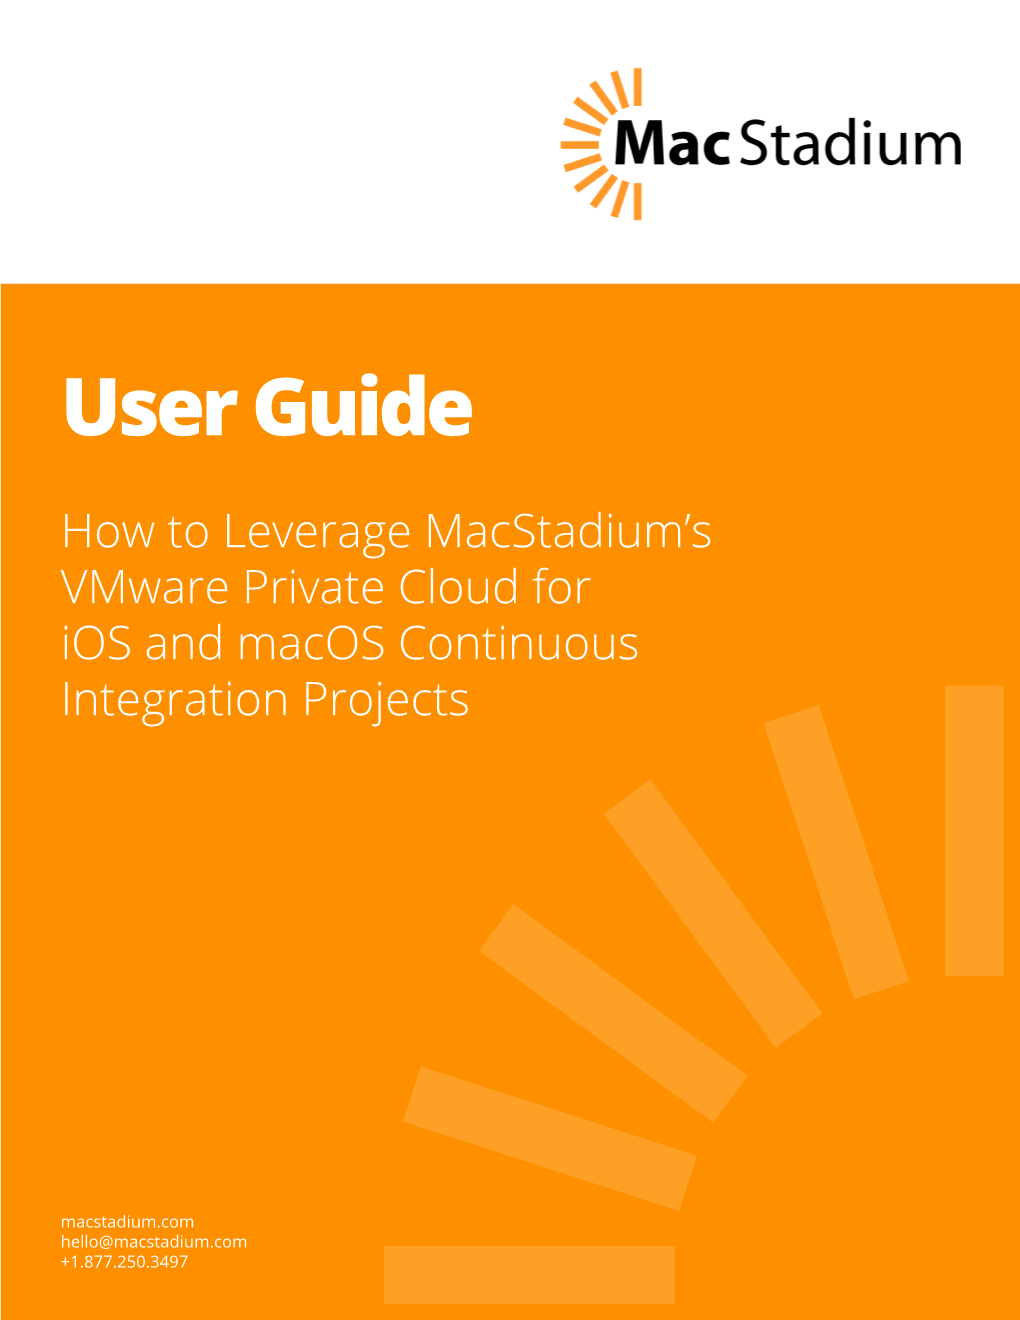 How to Leverage Macstadium's Vmware Private Cloud for Ios and Macos Continuous Integration Projects